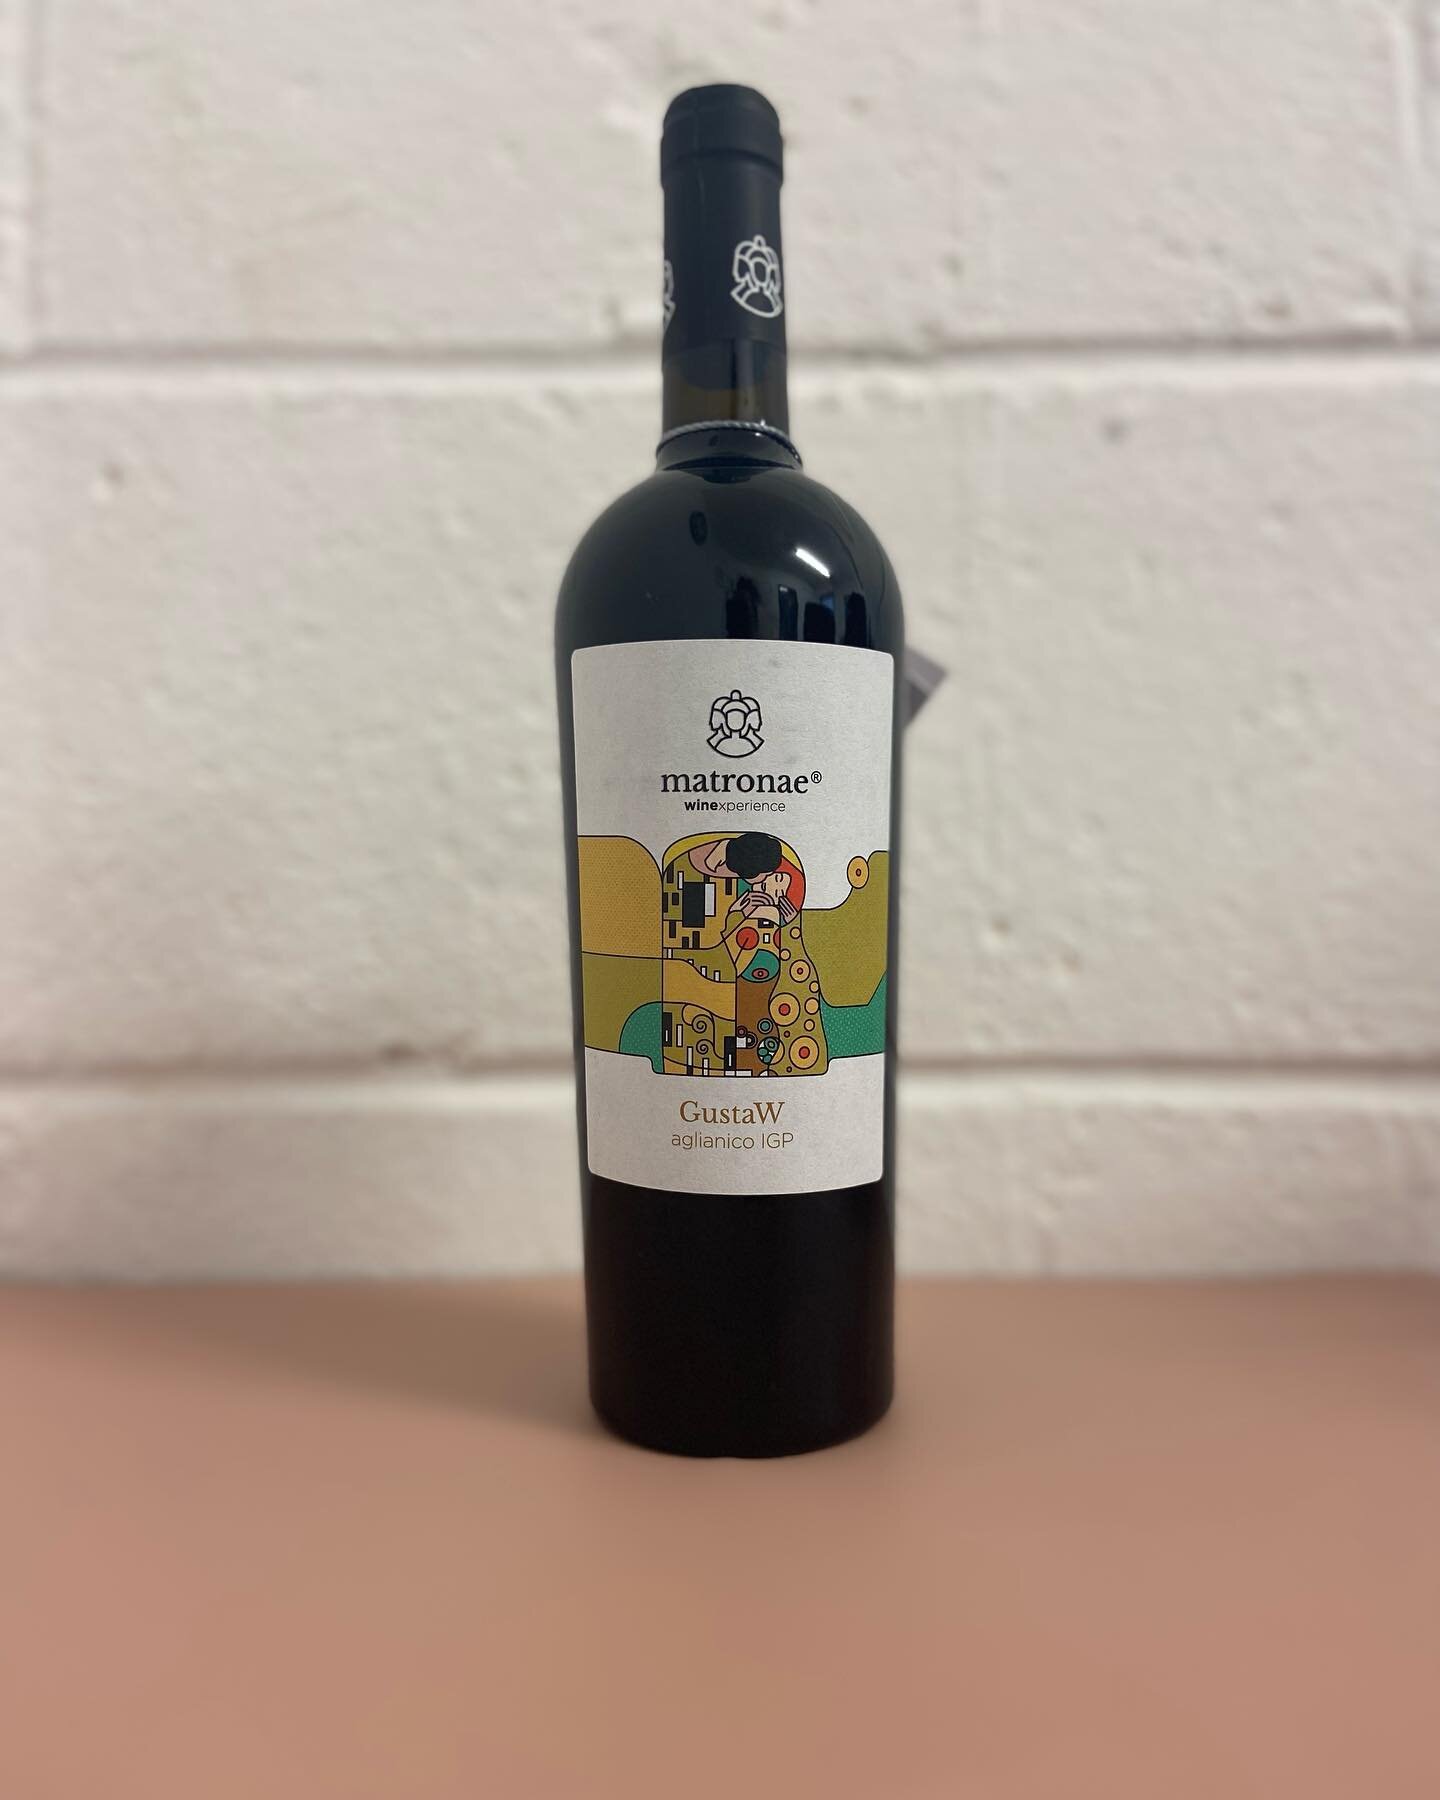 Our Friday favourite at Mia Vino is this Aglianico by our friends at Matronae. Full bodied and berry flavours, the best of both worlds. There&rsquo;s a reason this grape is considered in the top three of the greatest to come from Italy. 
.
.
.
.
.
.
